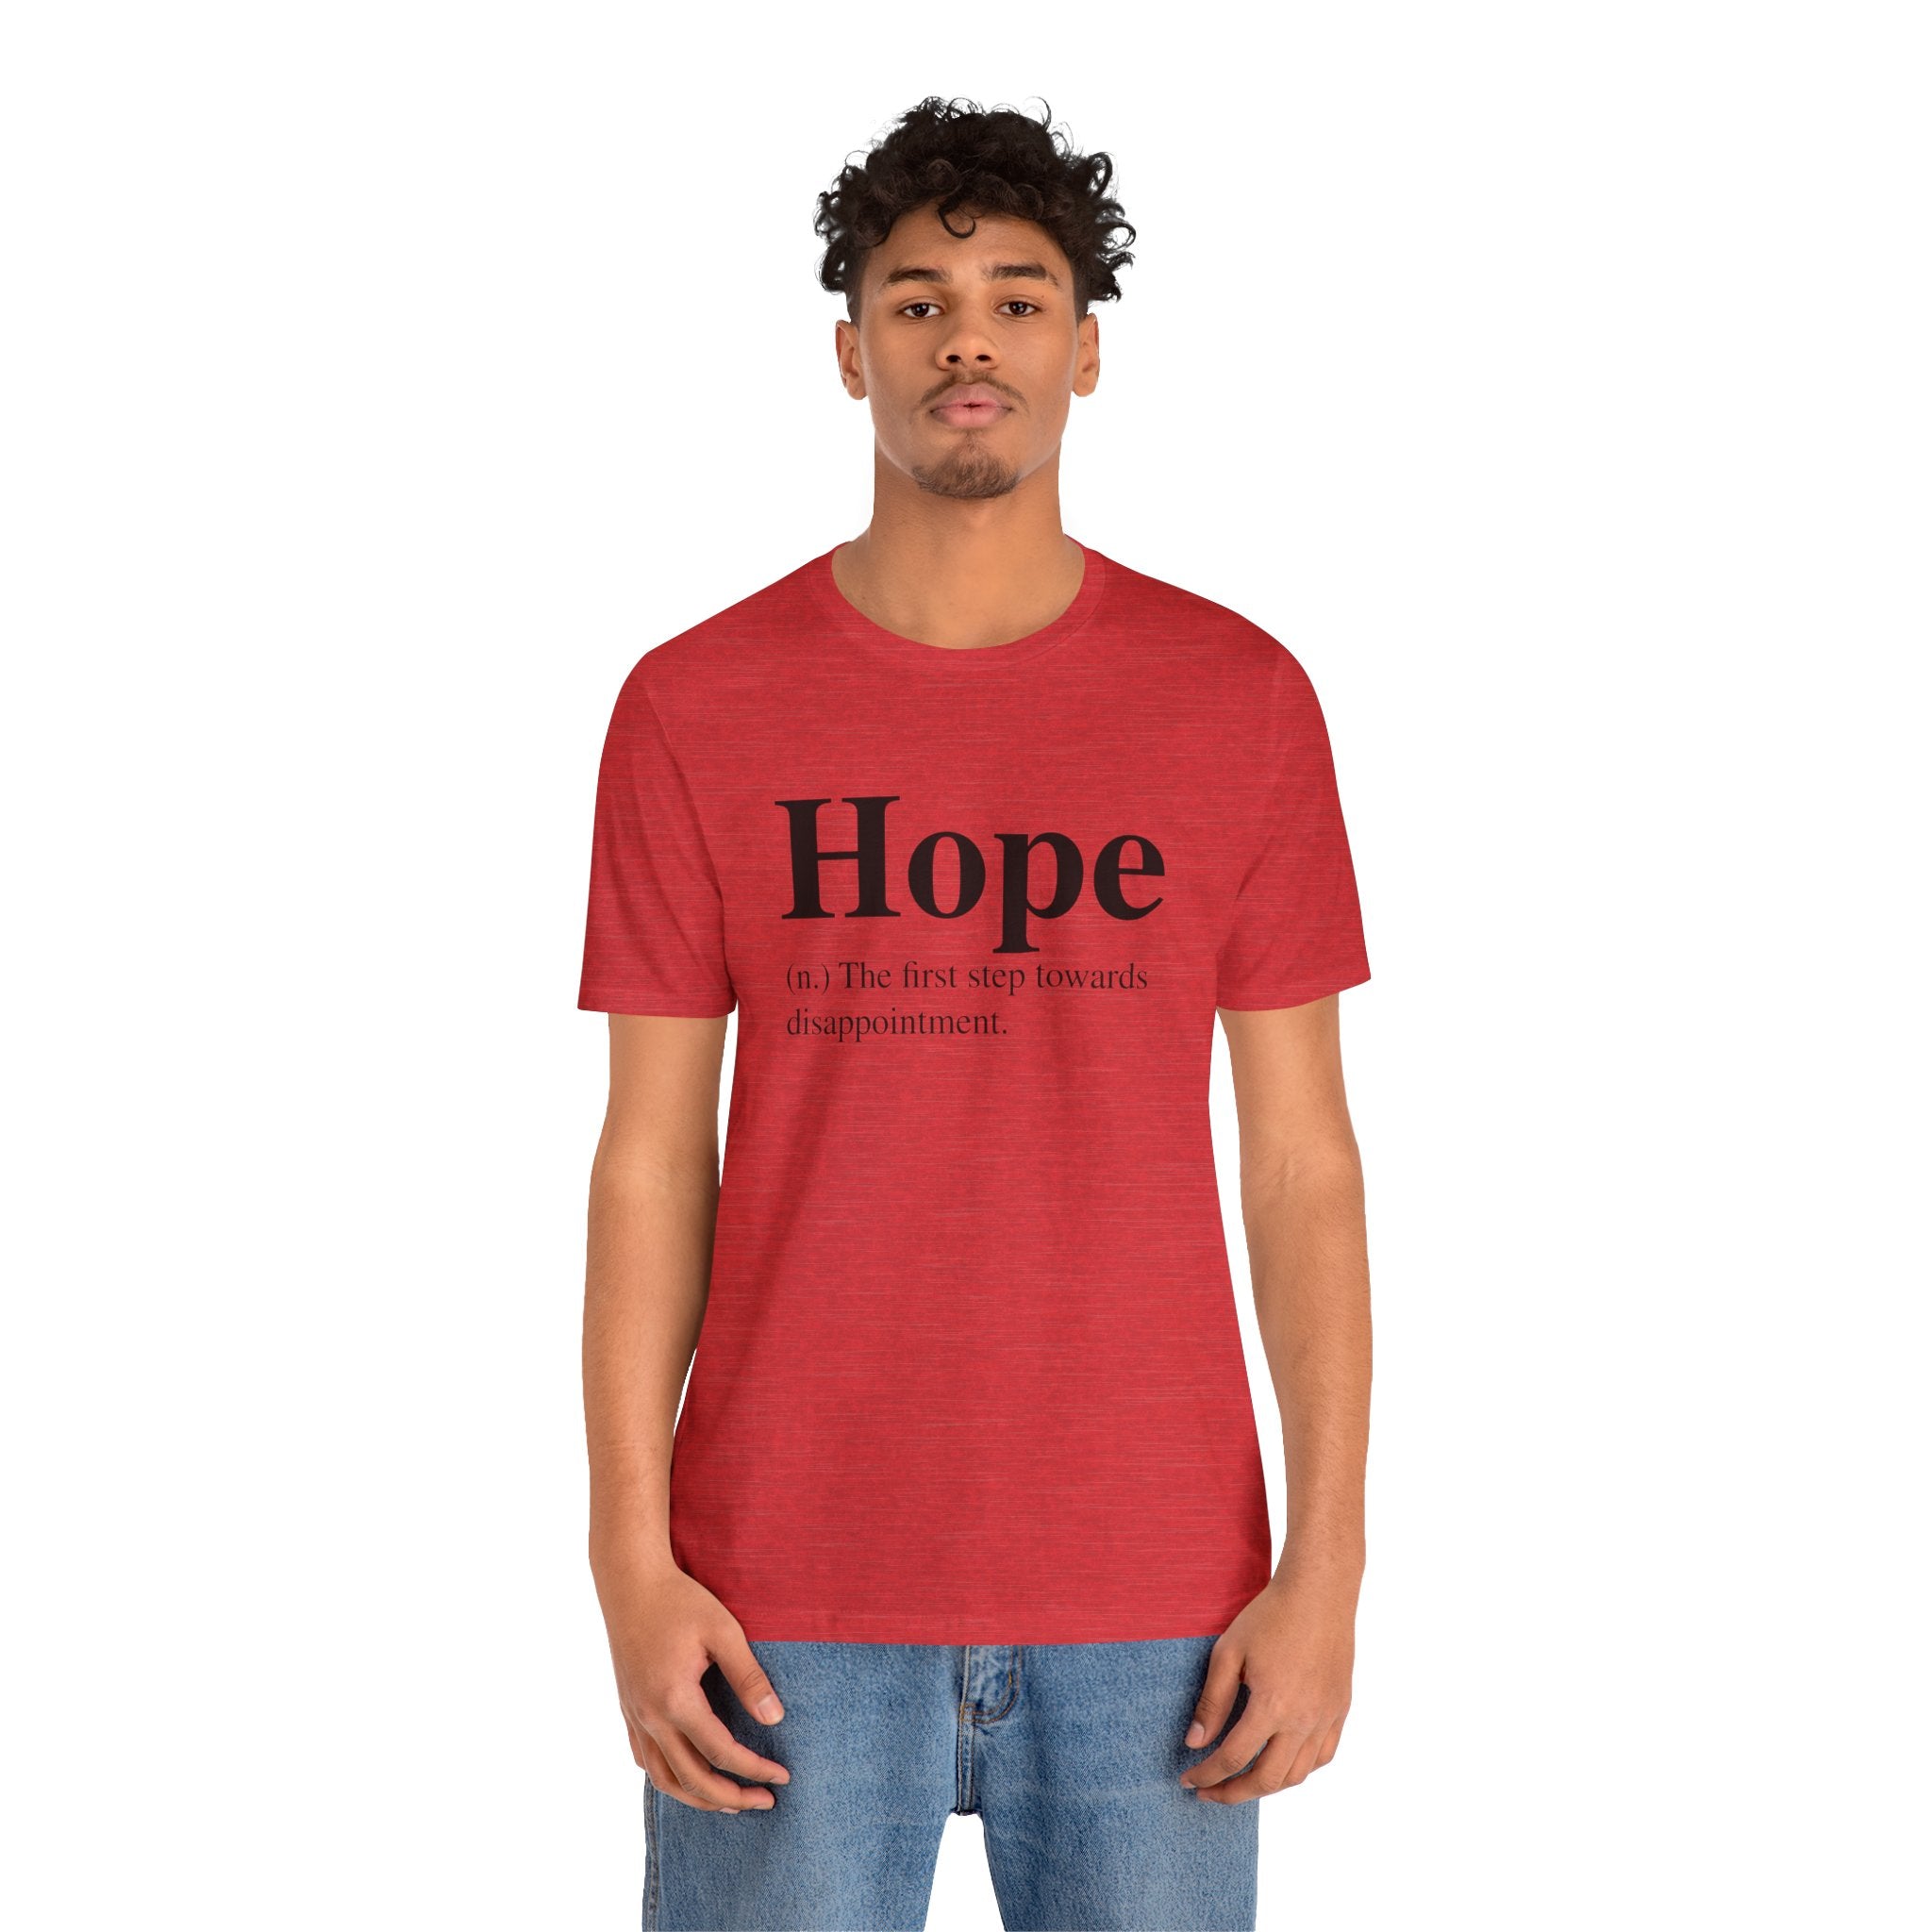 A man in a unisex Hope T-shirt with the word "Hope" followed by a cynical definition, paired with blue jeans, standing against a plain background.